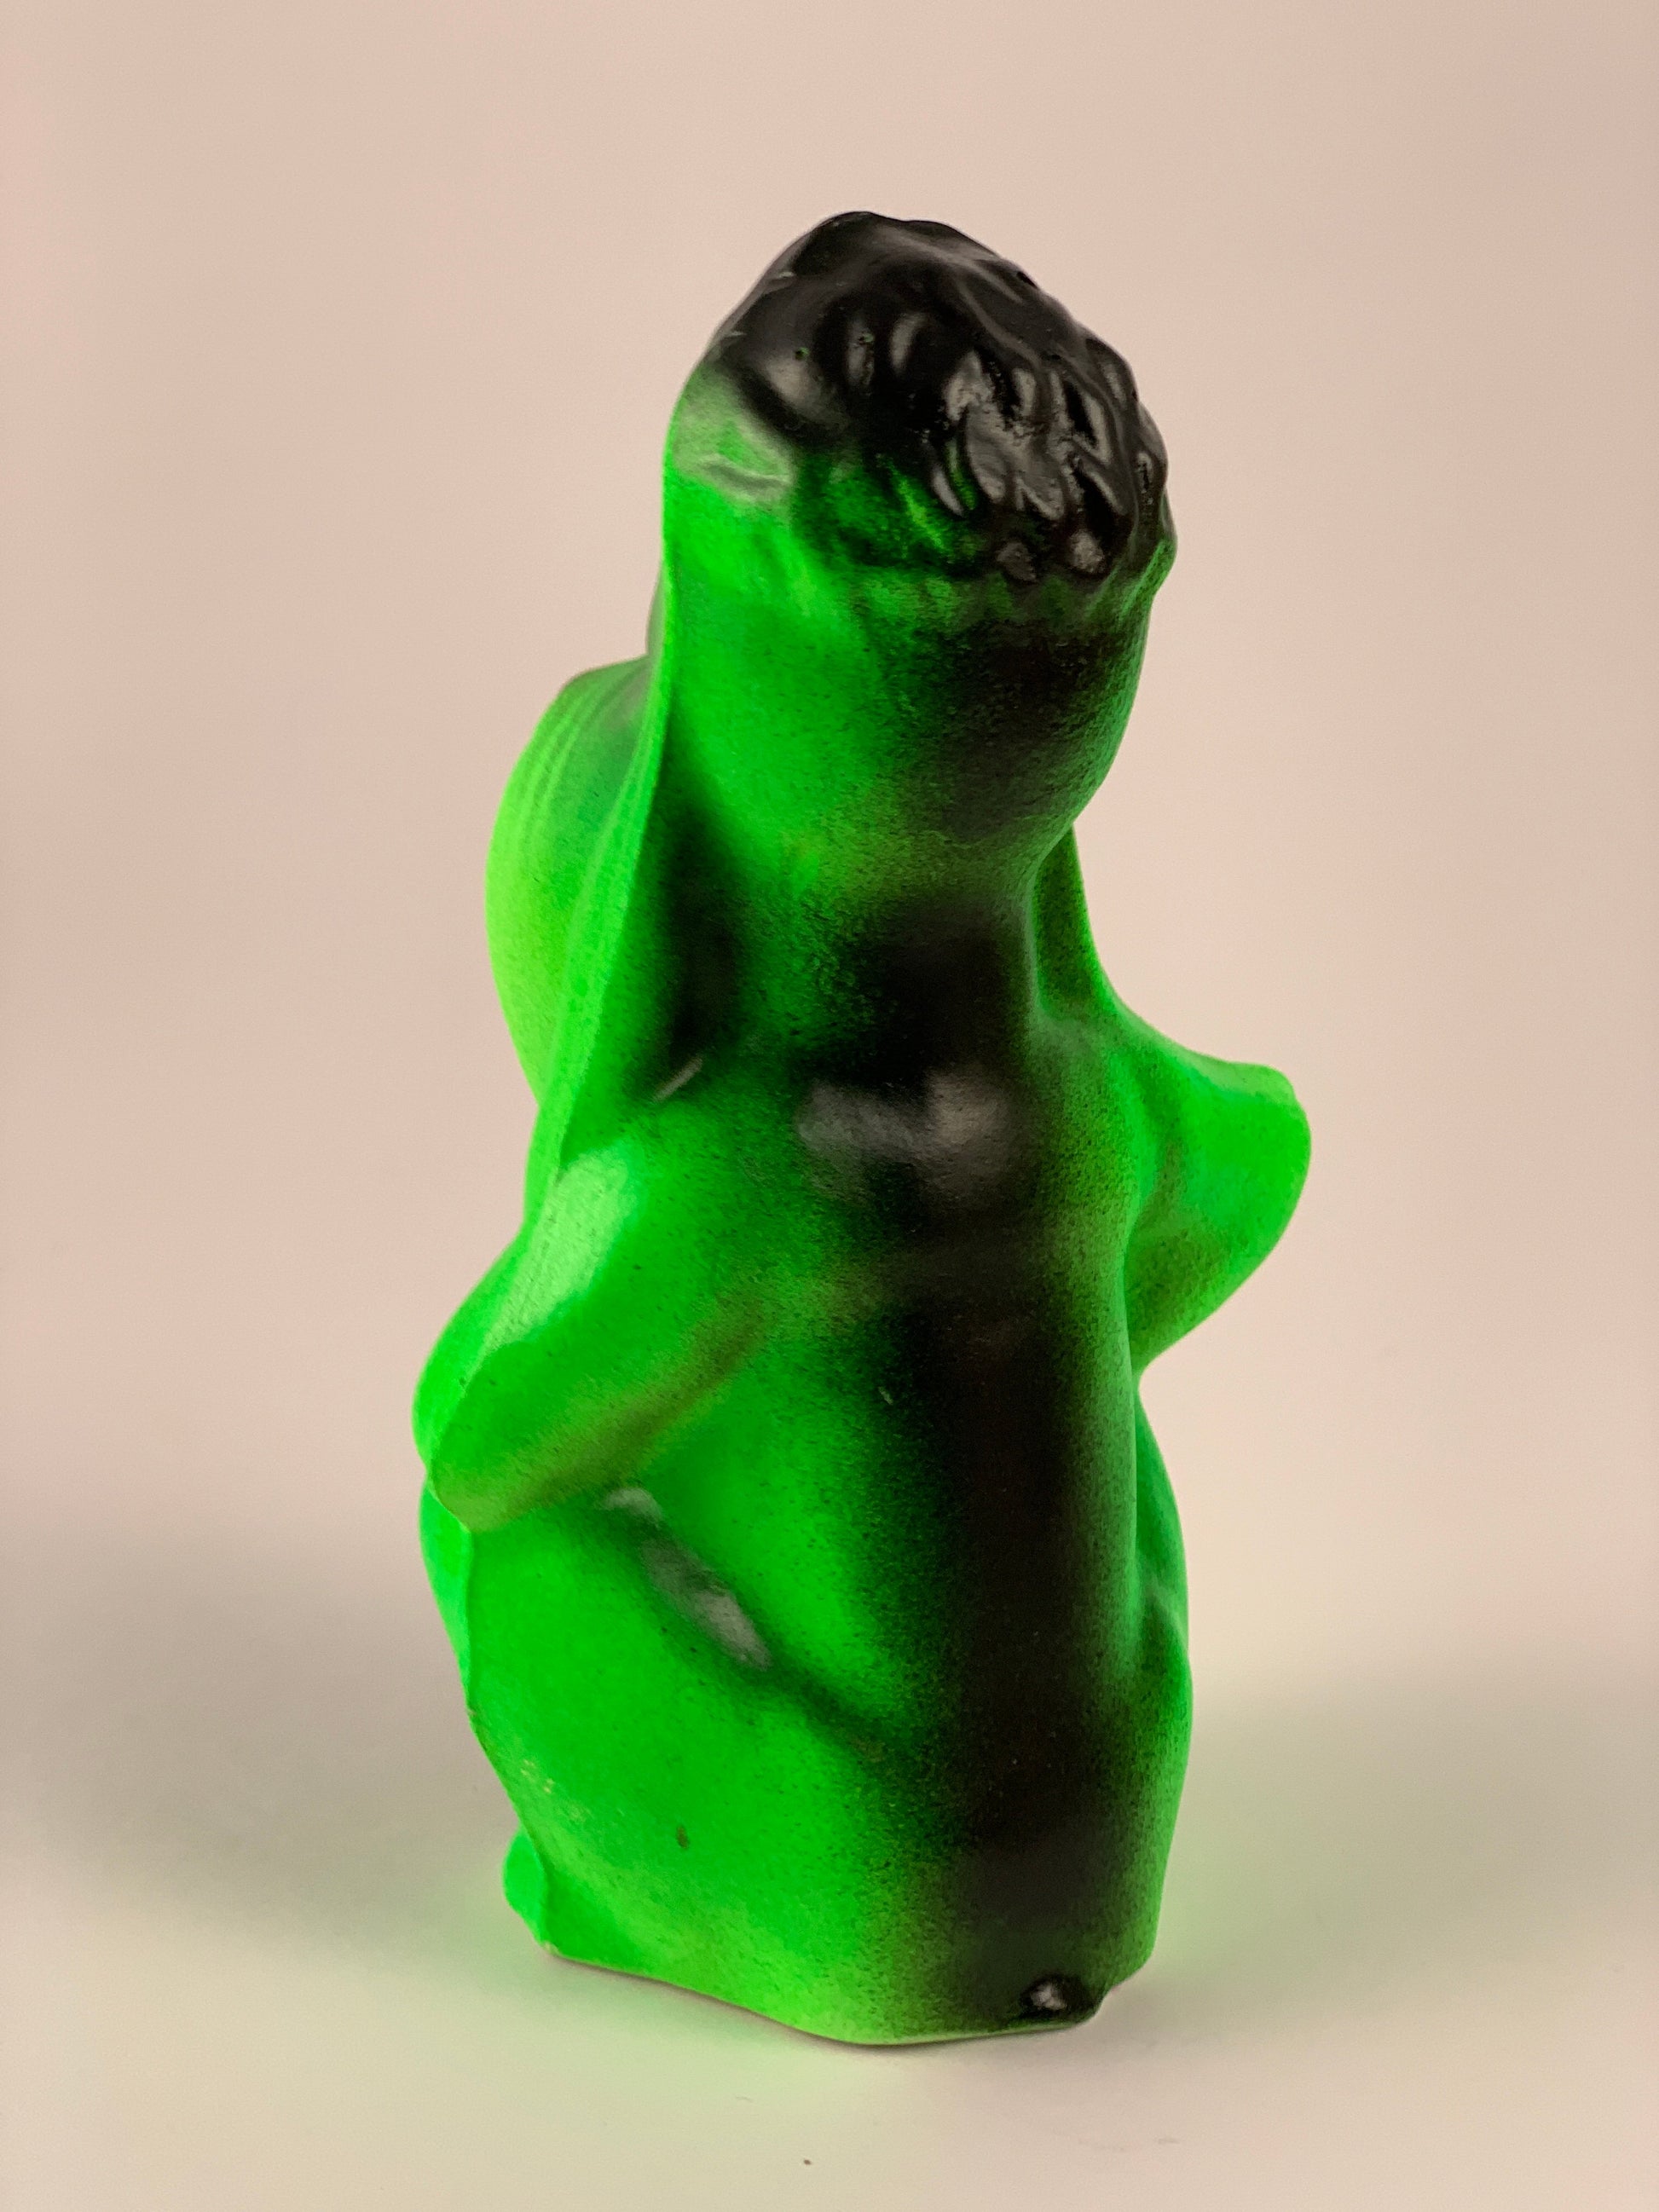 Mister Droopy Chalkware: Fluorescent Green and Black